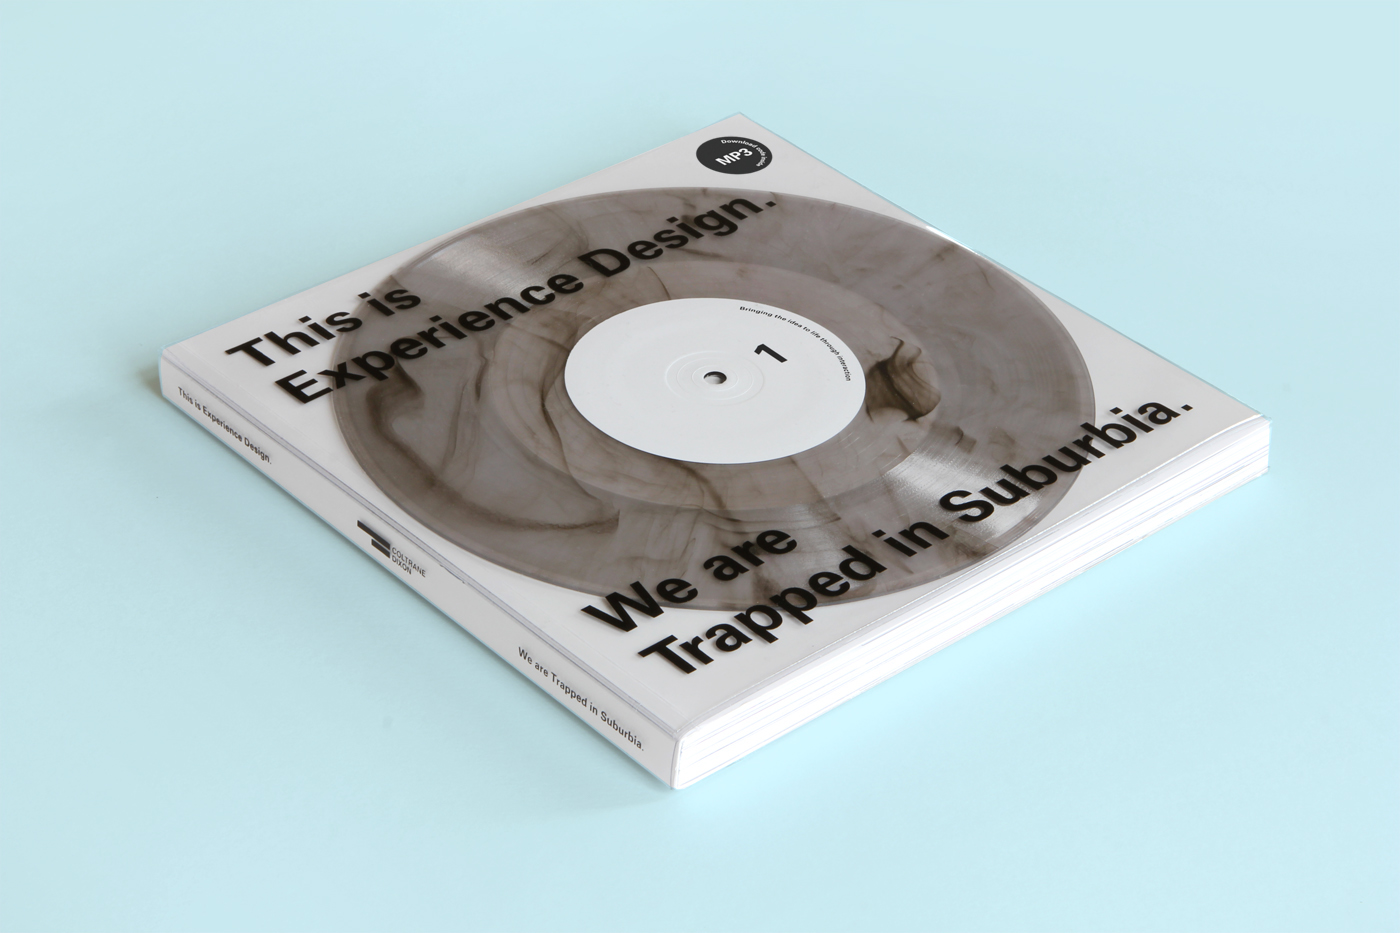 Trapped in Suburbia experience design Monograph book publication the hague dutch The Netherlands Nederland den haag vinyl Records Audio visual Confucius